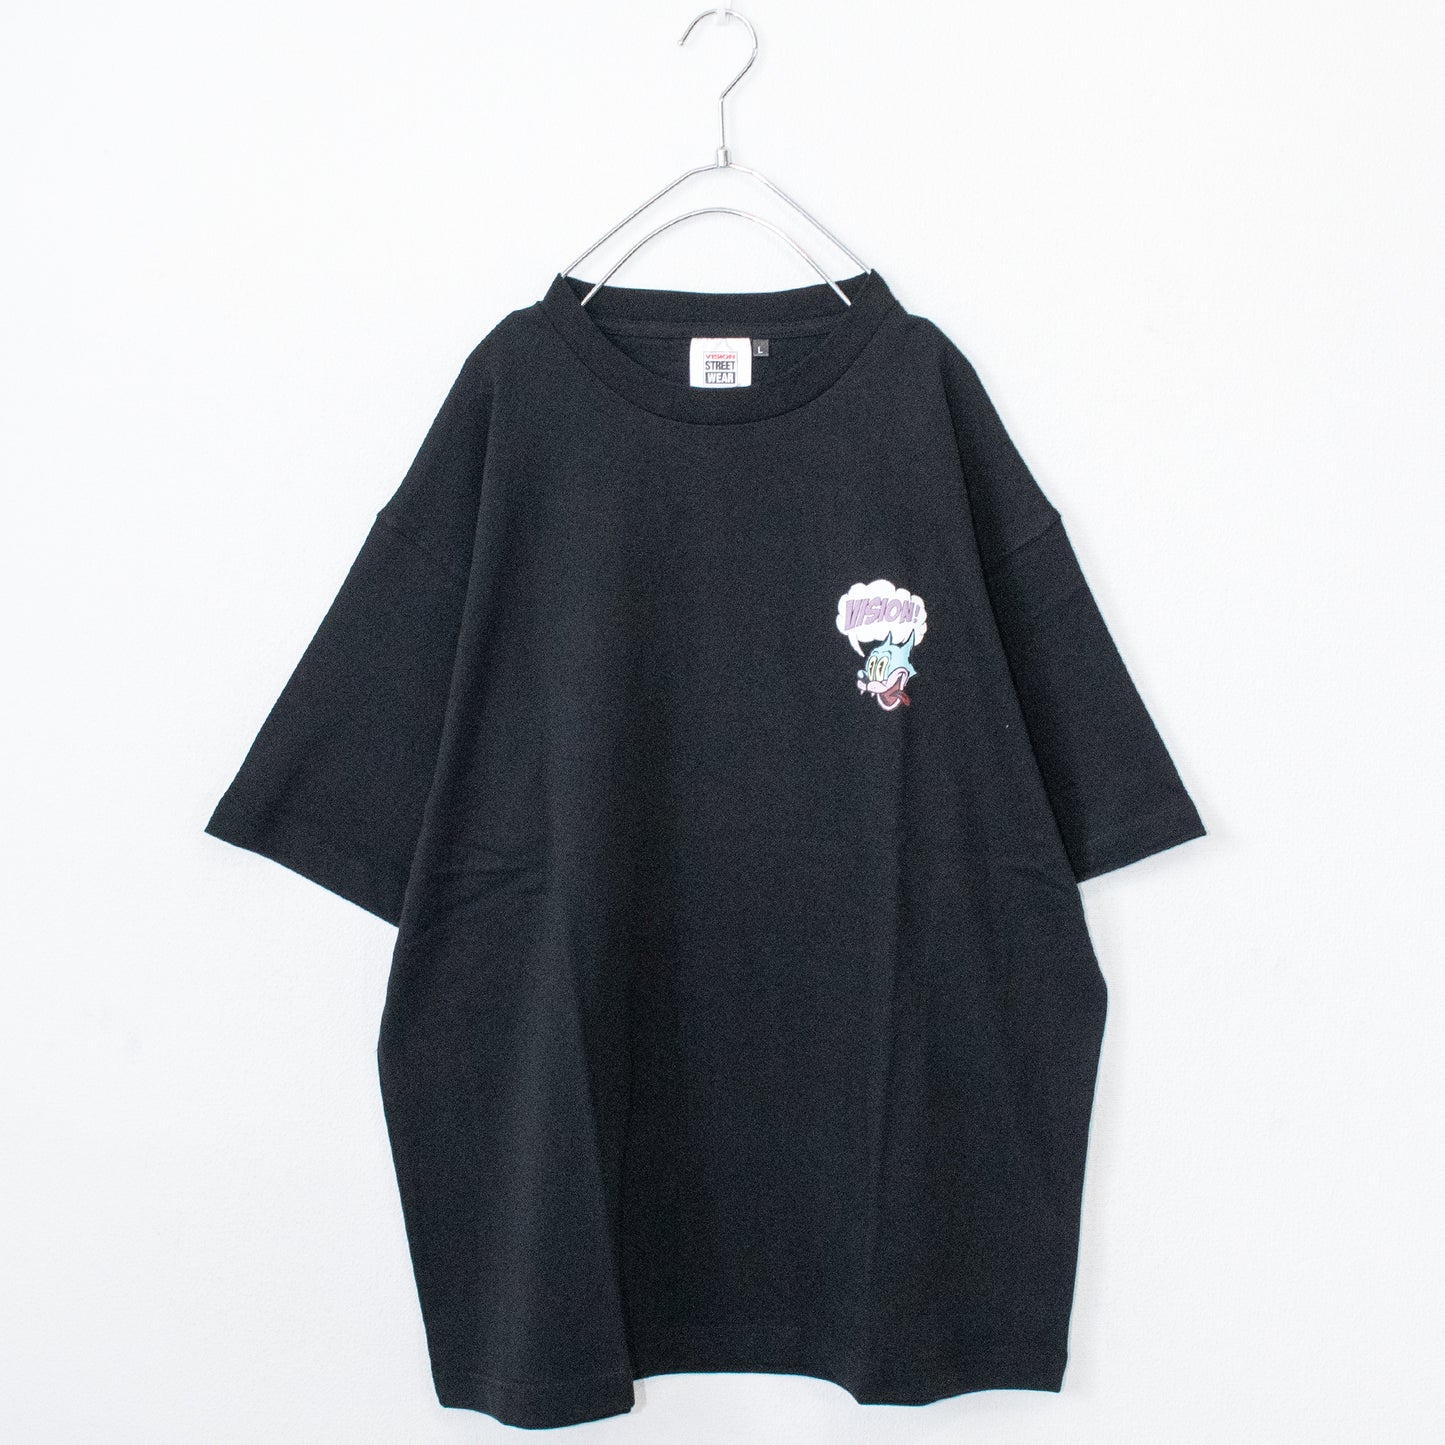 VISION STREET WEAR Comic S/S T-shirt (2 color) - YOUAREMYPOISON